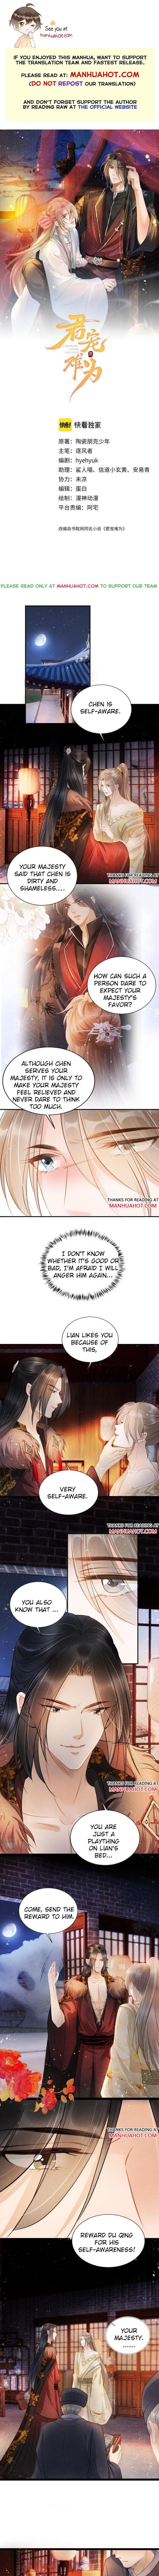 Emperor's Favor Not Needed - Page 2